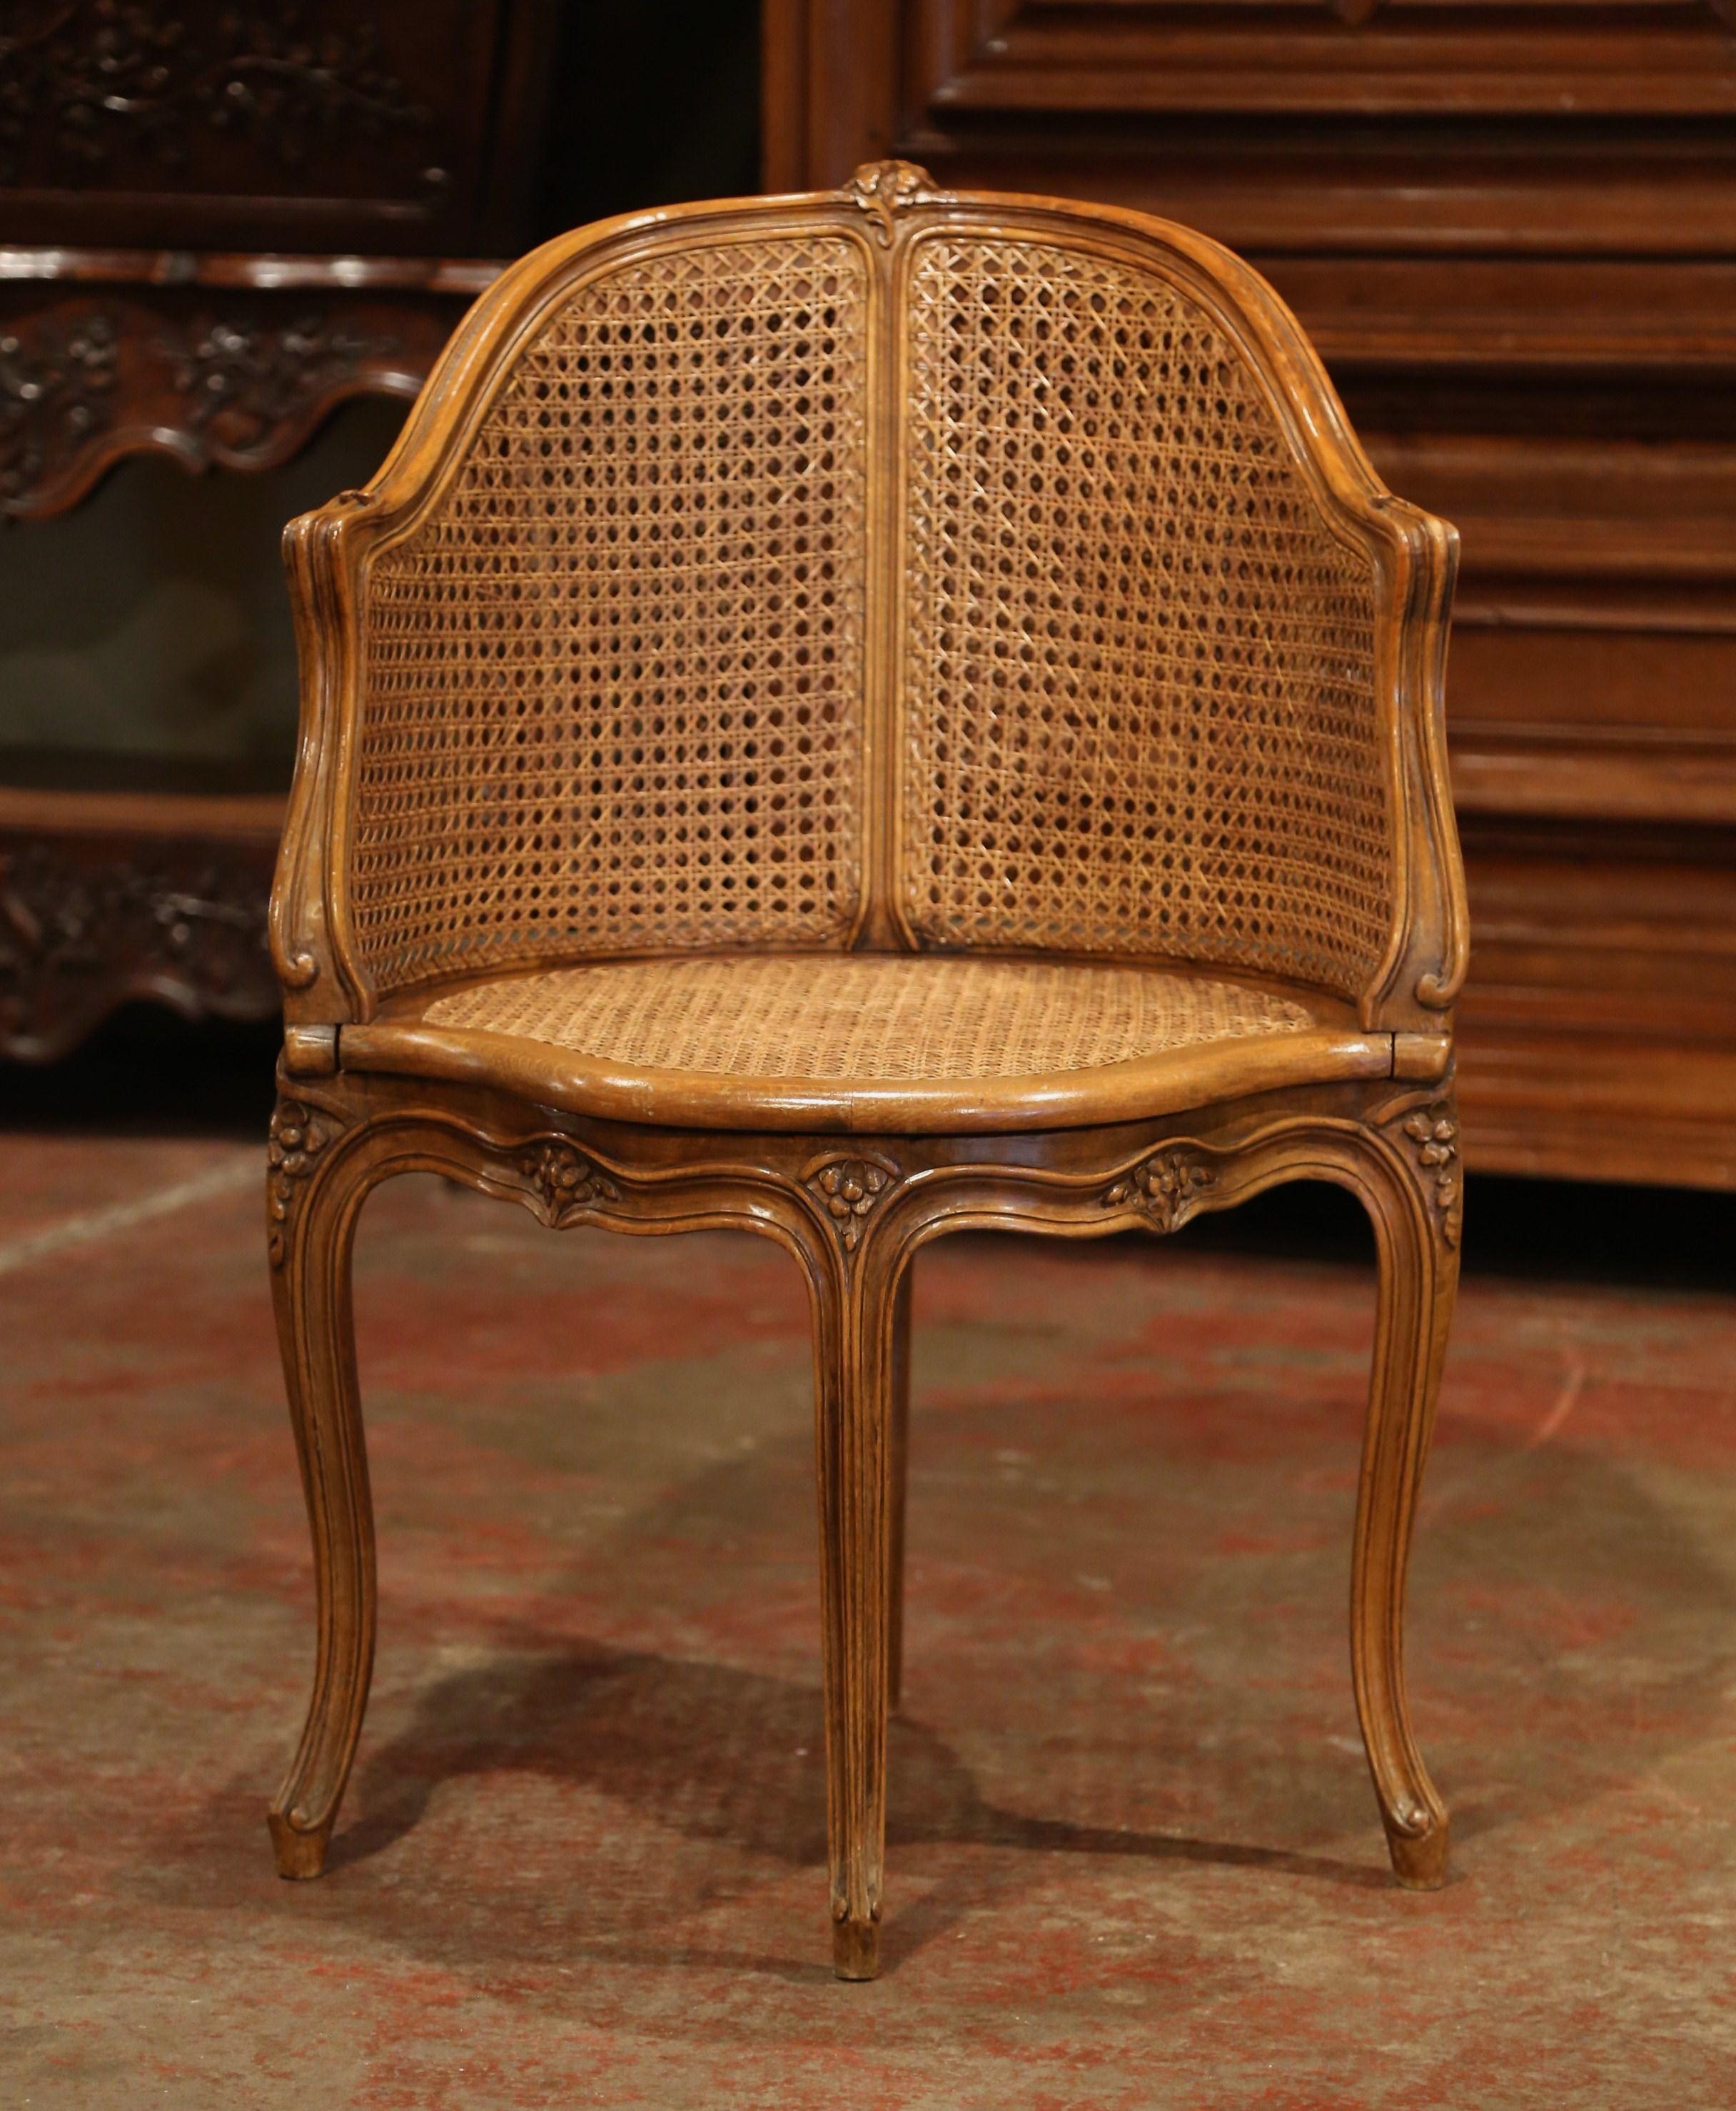 Decorate a study or office with this elegant antique desk armchair. Crafted in Provence, France, circa 1900, the corner chair has an arched and curved double-cane back. The desk chair stands on four carved cabriole legs over a scalloped apron